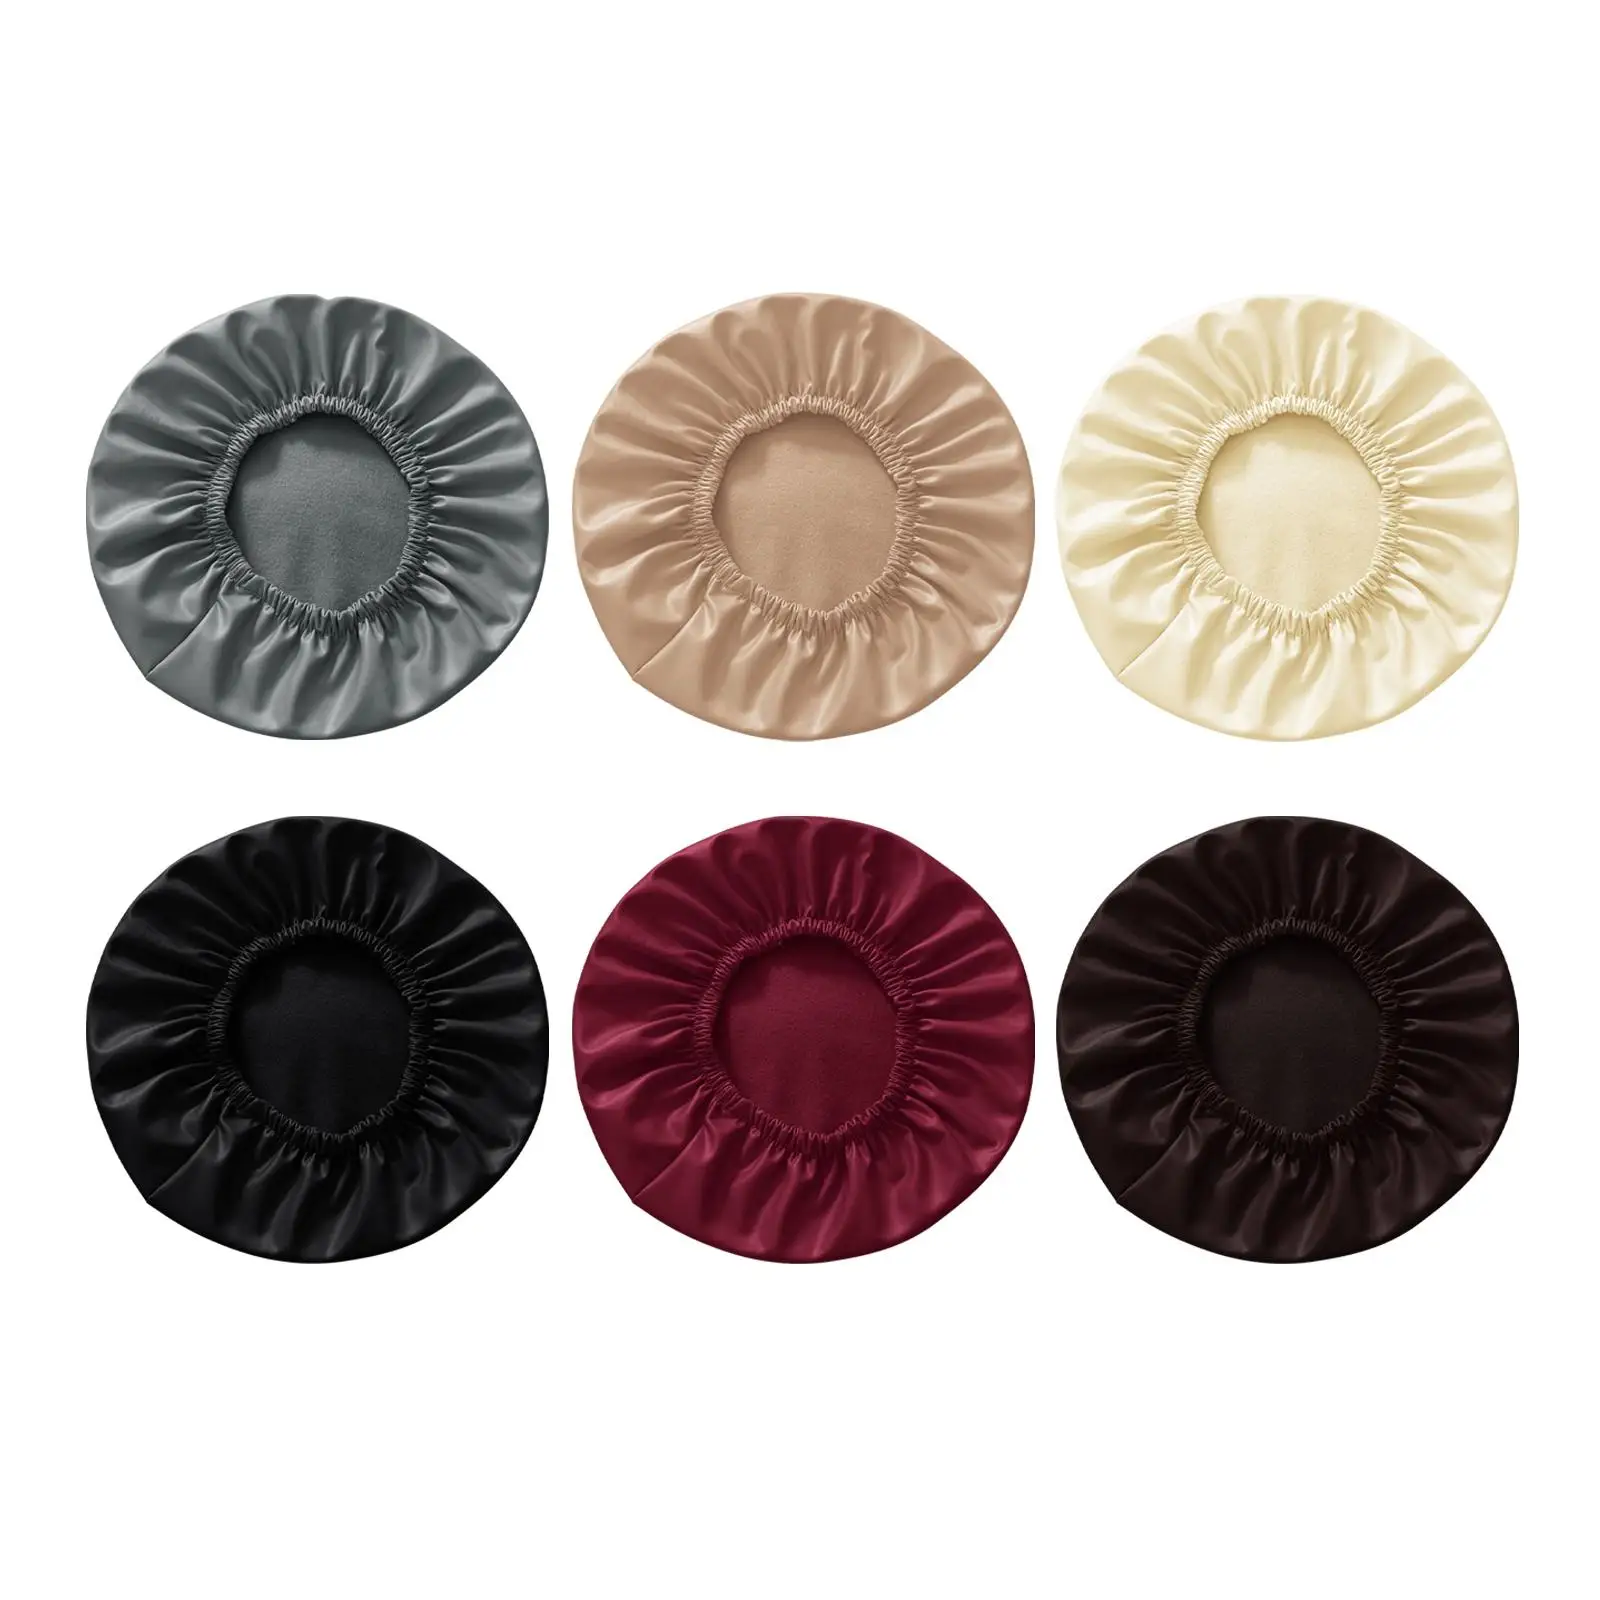 Elastic PU Leather Round Stool Chair Cover Waterproof Pump Chair Protector Bar Salon Small Round Seat Cushion Sleeve(no chair)